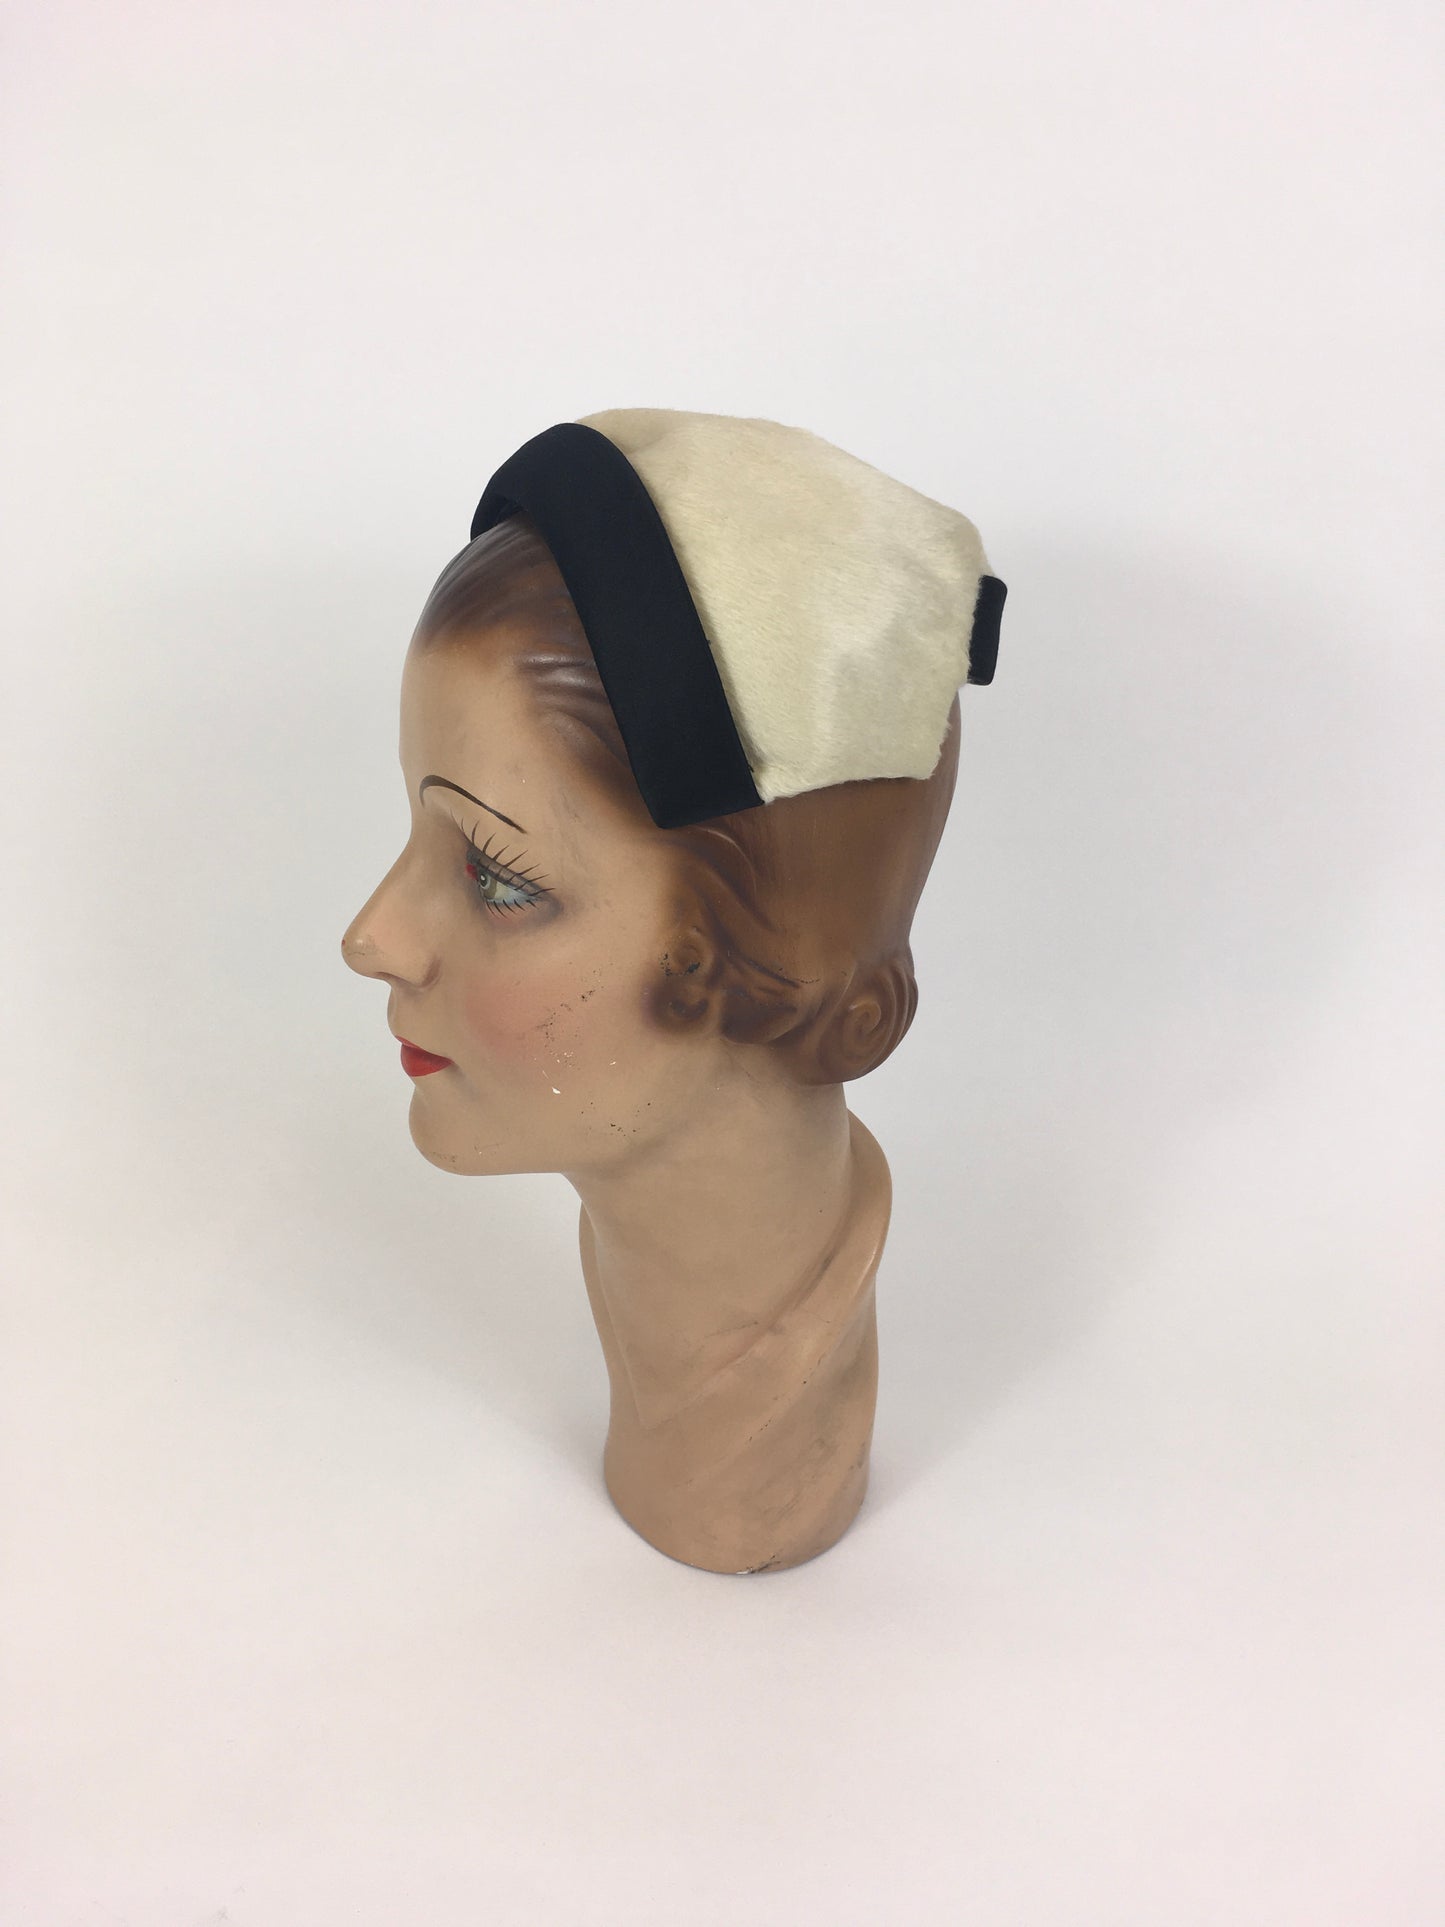 Original 1950’s Darling Headpiece in Cream with Black Banding - ‘ Emme in New York ‘ Label